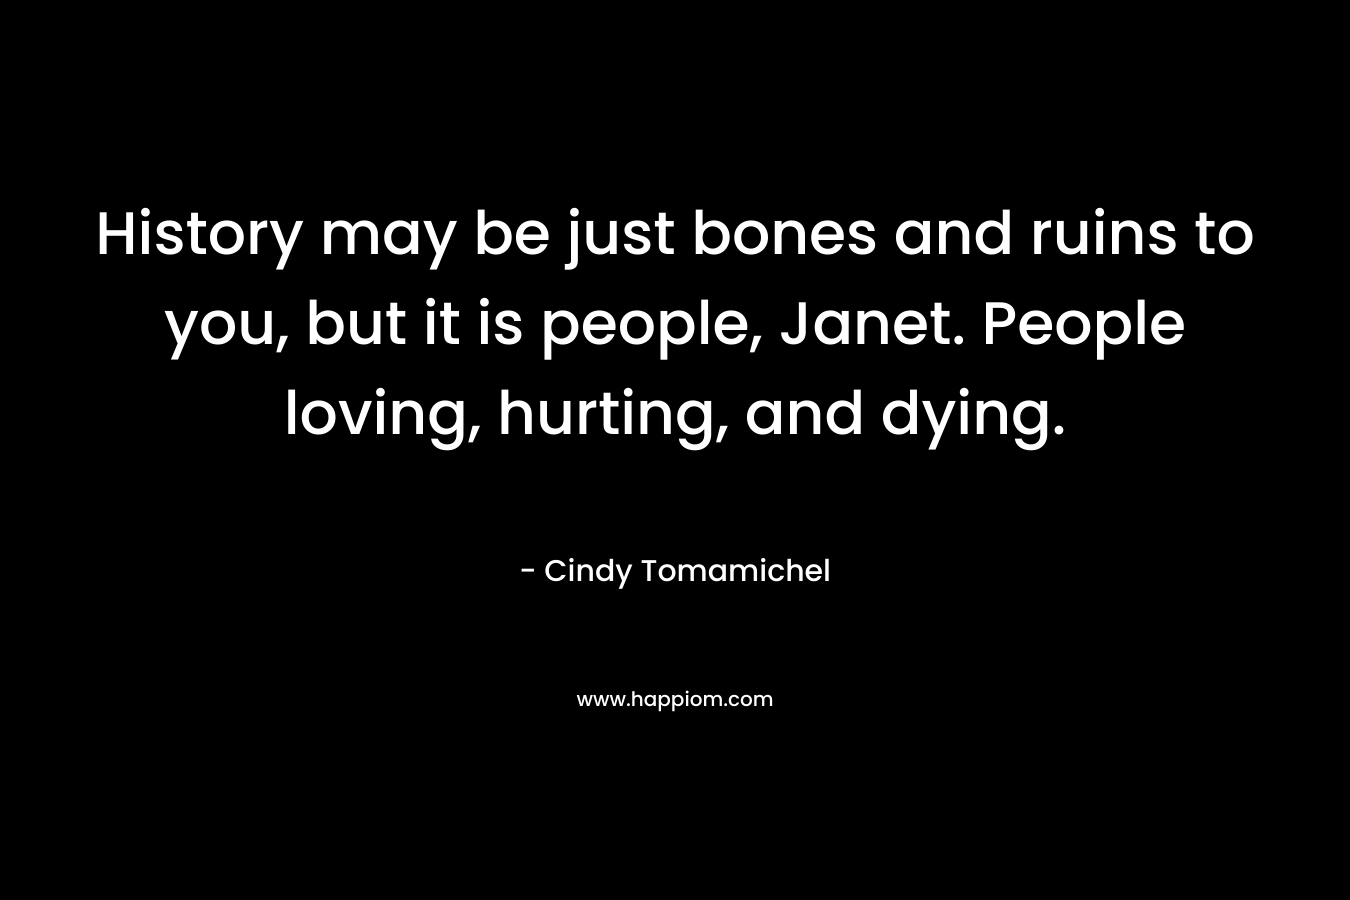 History may be just bones and ruins to you, but it is people, Janet. People loving, hurting, and dying.